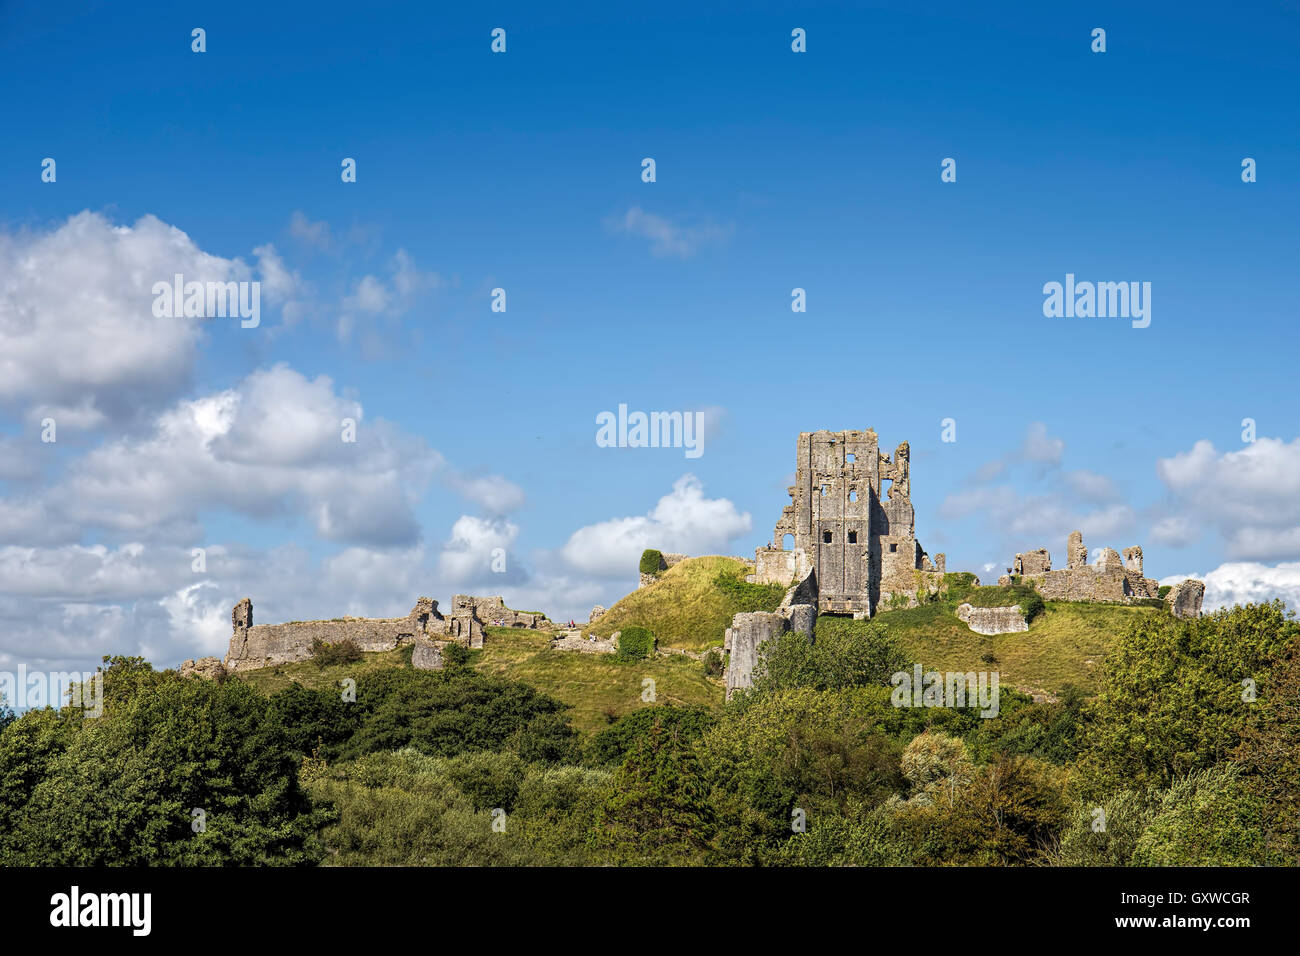 Ancient monument. Corfe Castle dating back to the 11th Century situated in the Purbeck Hills. isle of Purbeck, Dorset, England UK Stock Photo